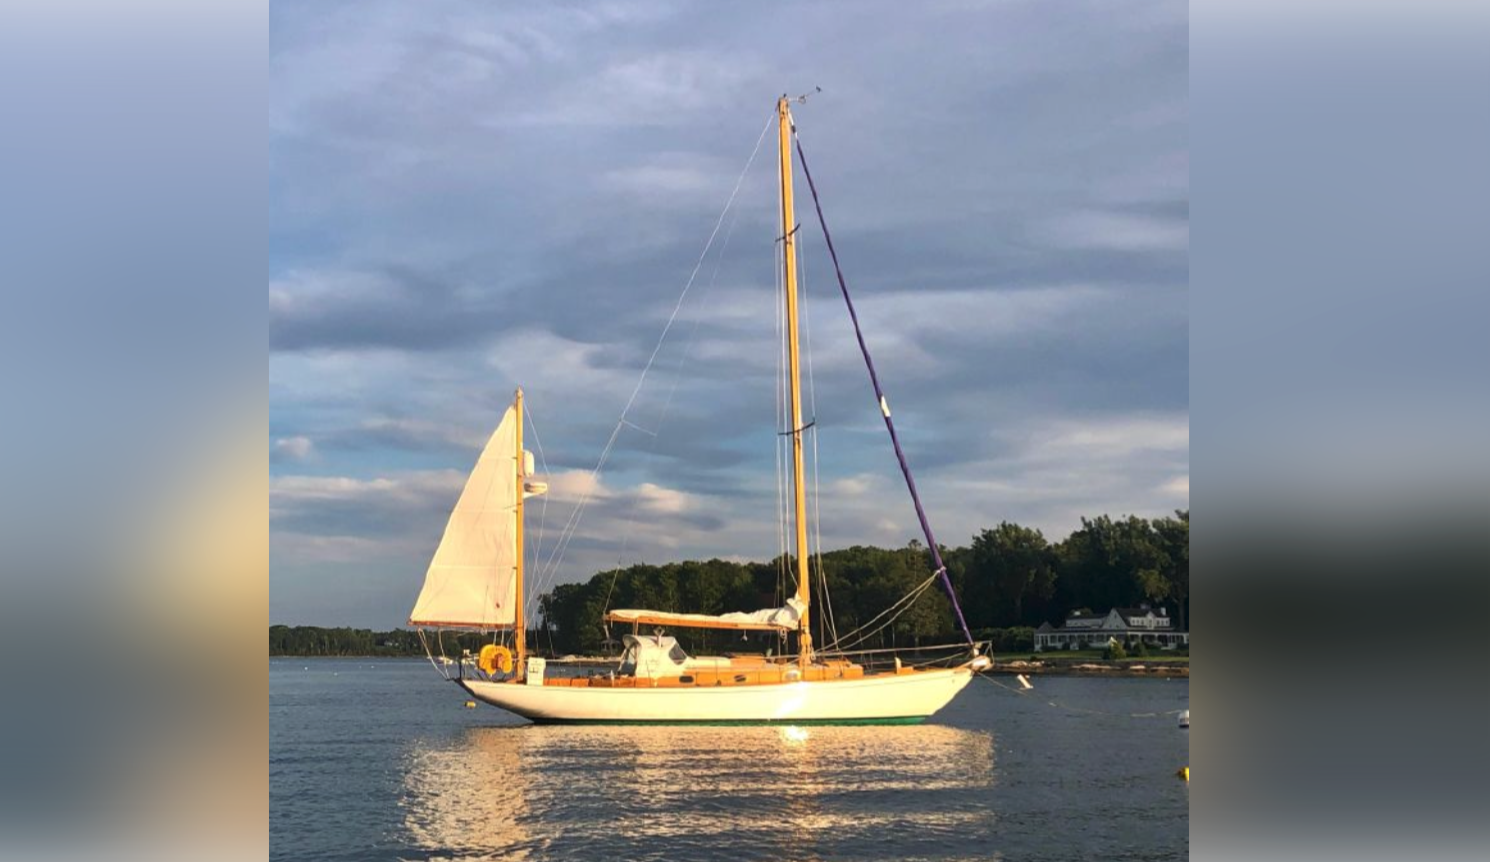 1964 Concordia 41 MADRIGAL. Asking $57,000. (formerly Rockport Marine brokerage, listing down but still for sale. Yacht is in Round Pond ME.) More Information: